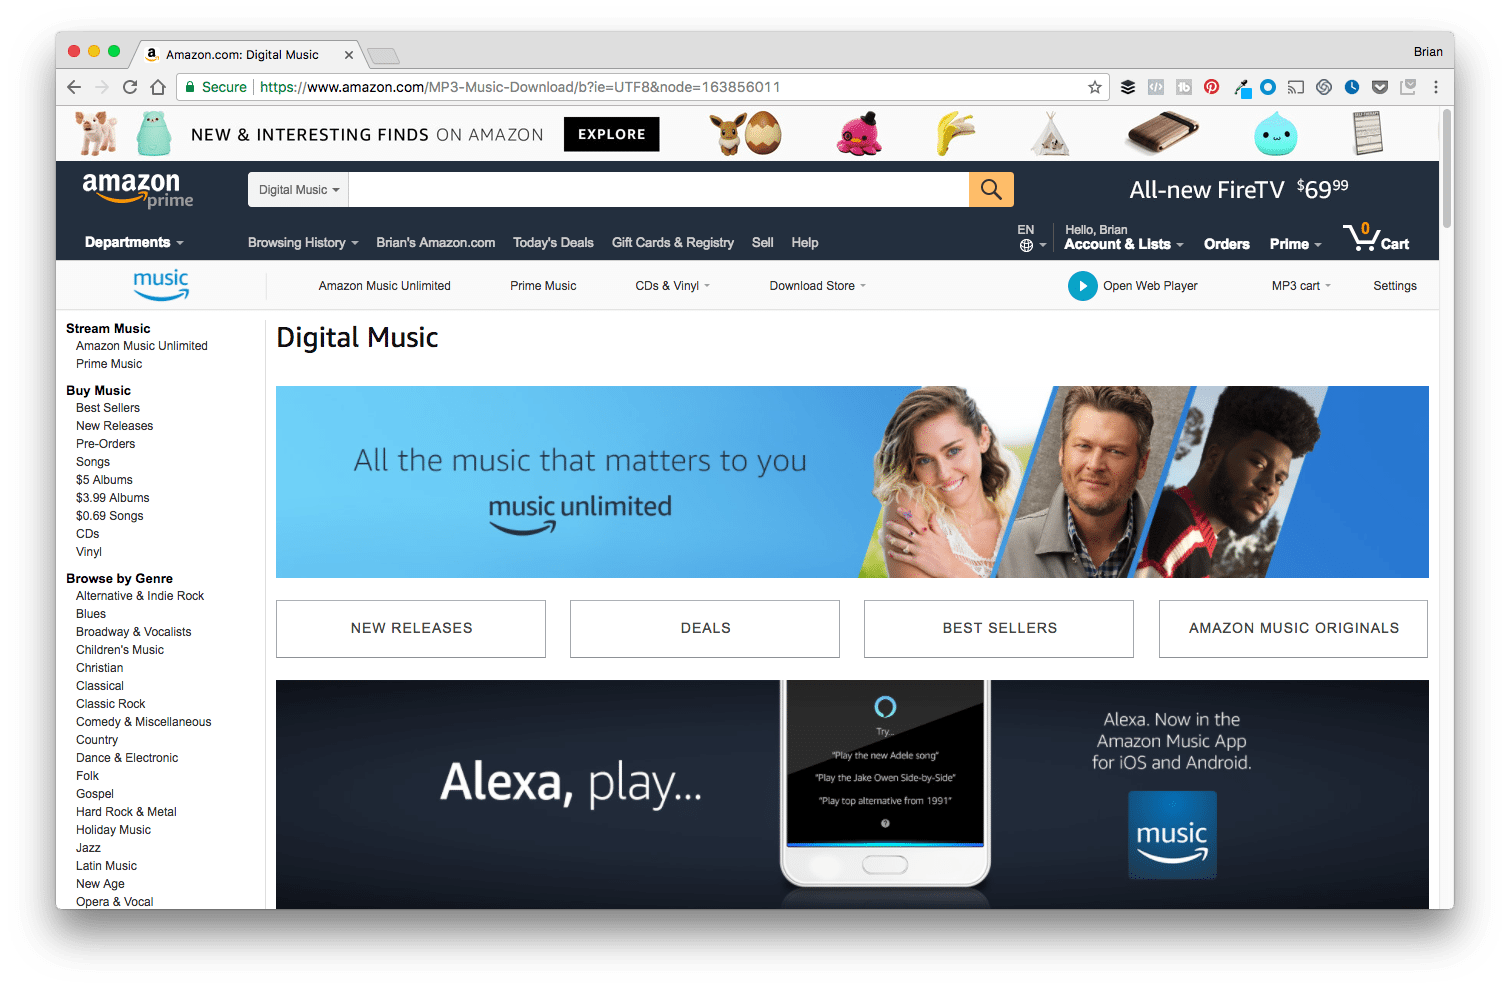 Amazon Background Music Page Preview